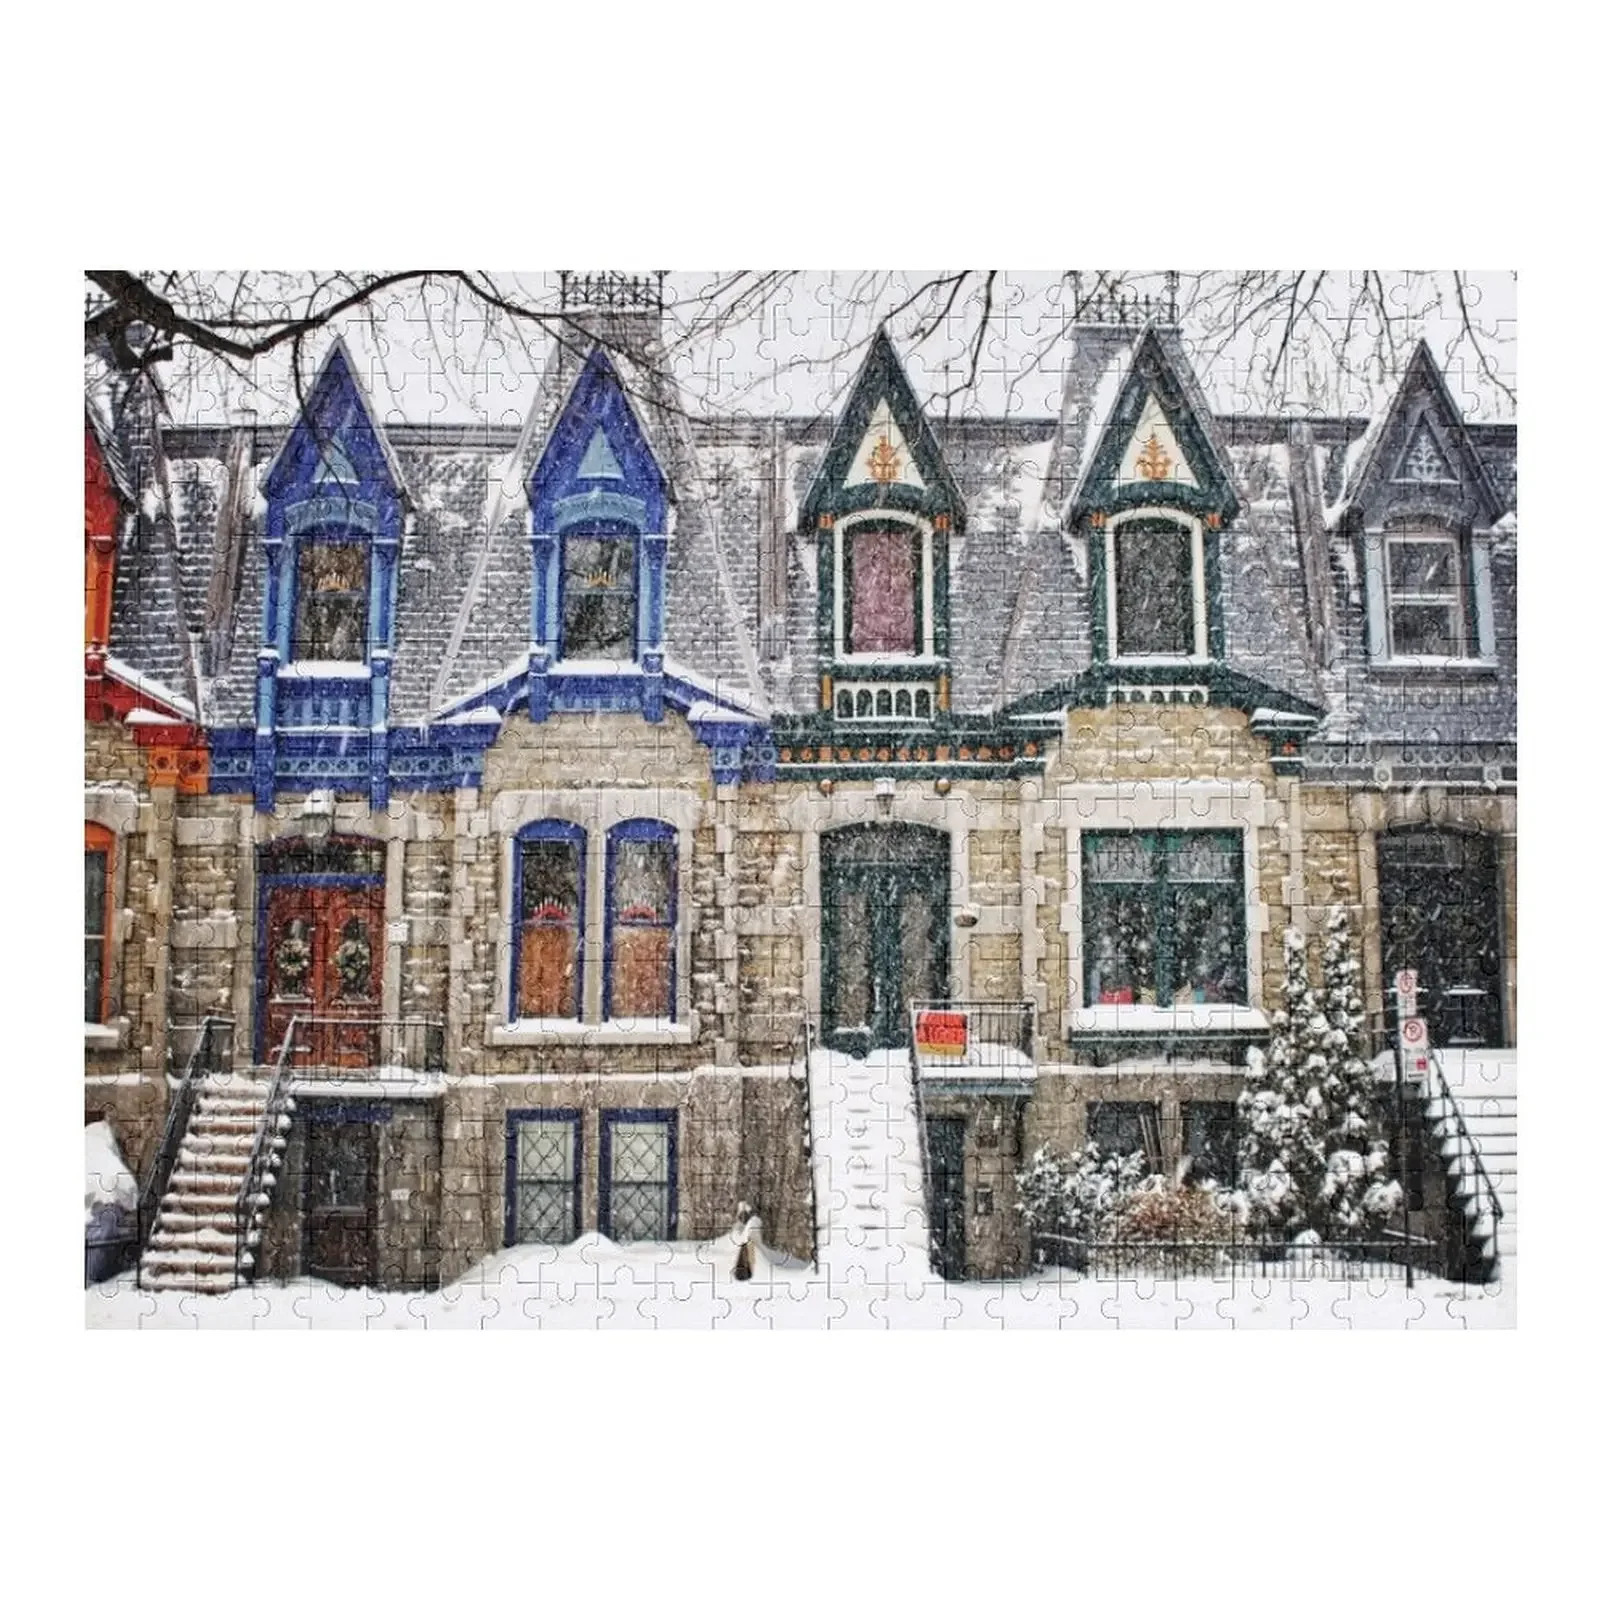 Montreal Victorian Architecture - The Enchanted Winter Jigsaw Puzzle Wooden Boxes Wooden Decor Paintings Puzzle montreal architectural guide